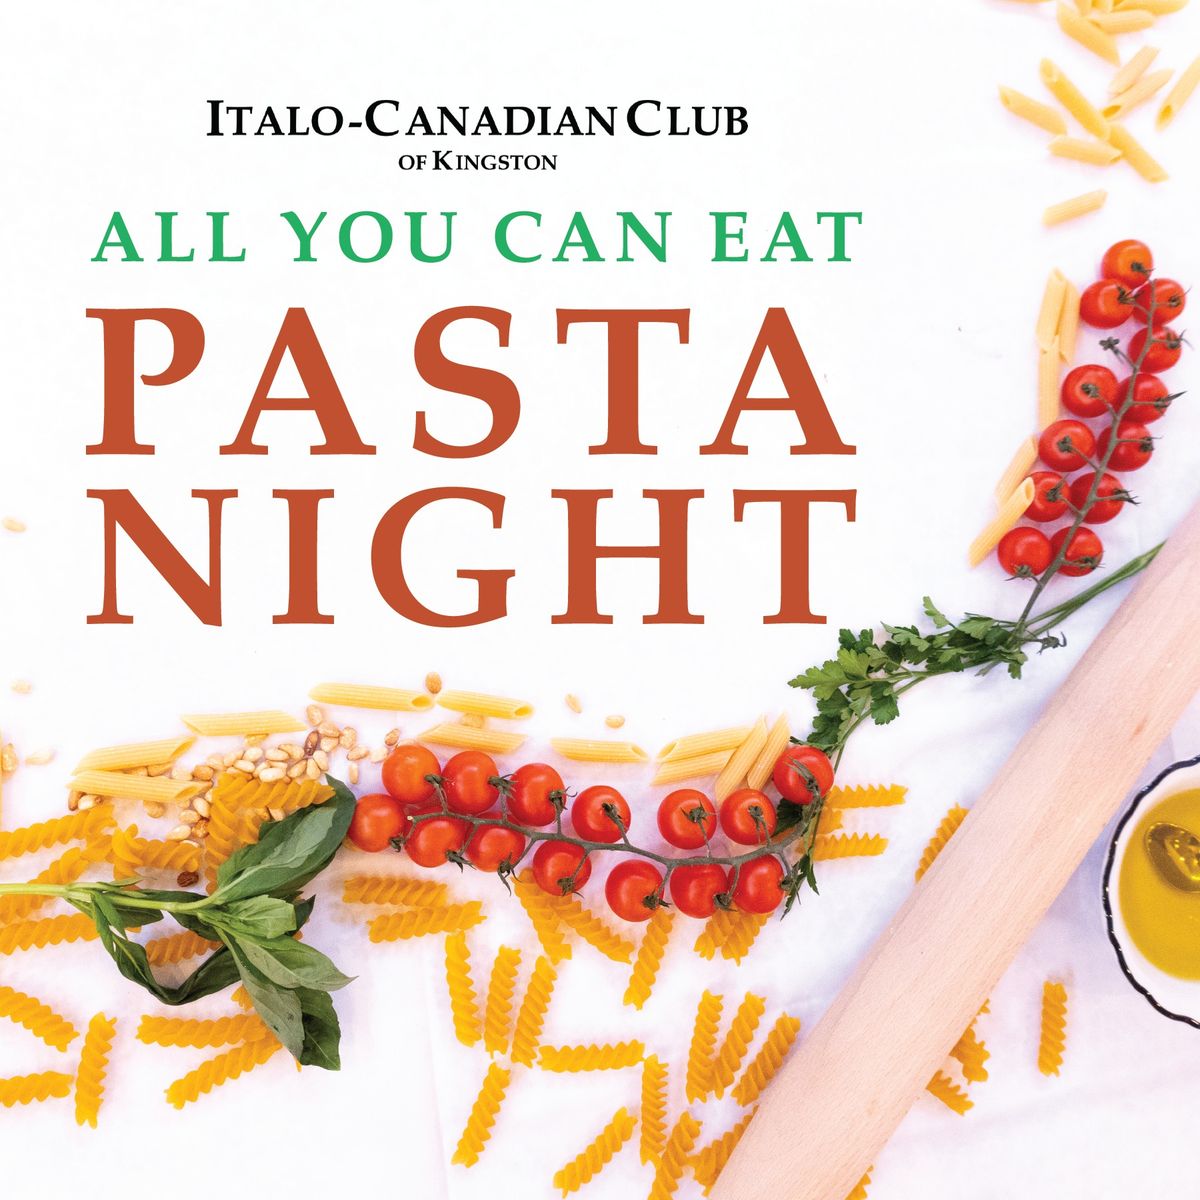 All You Can Eat Pasta Night